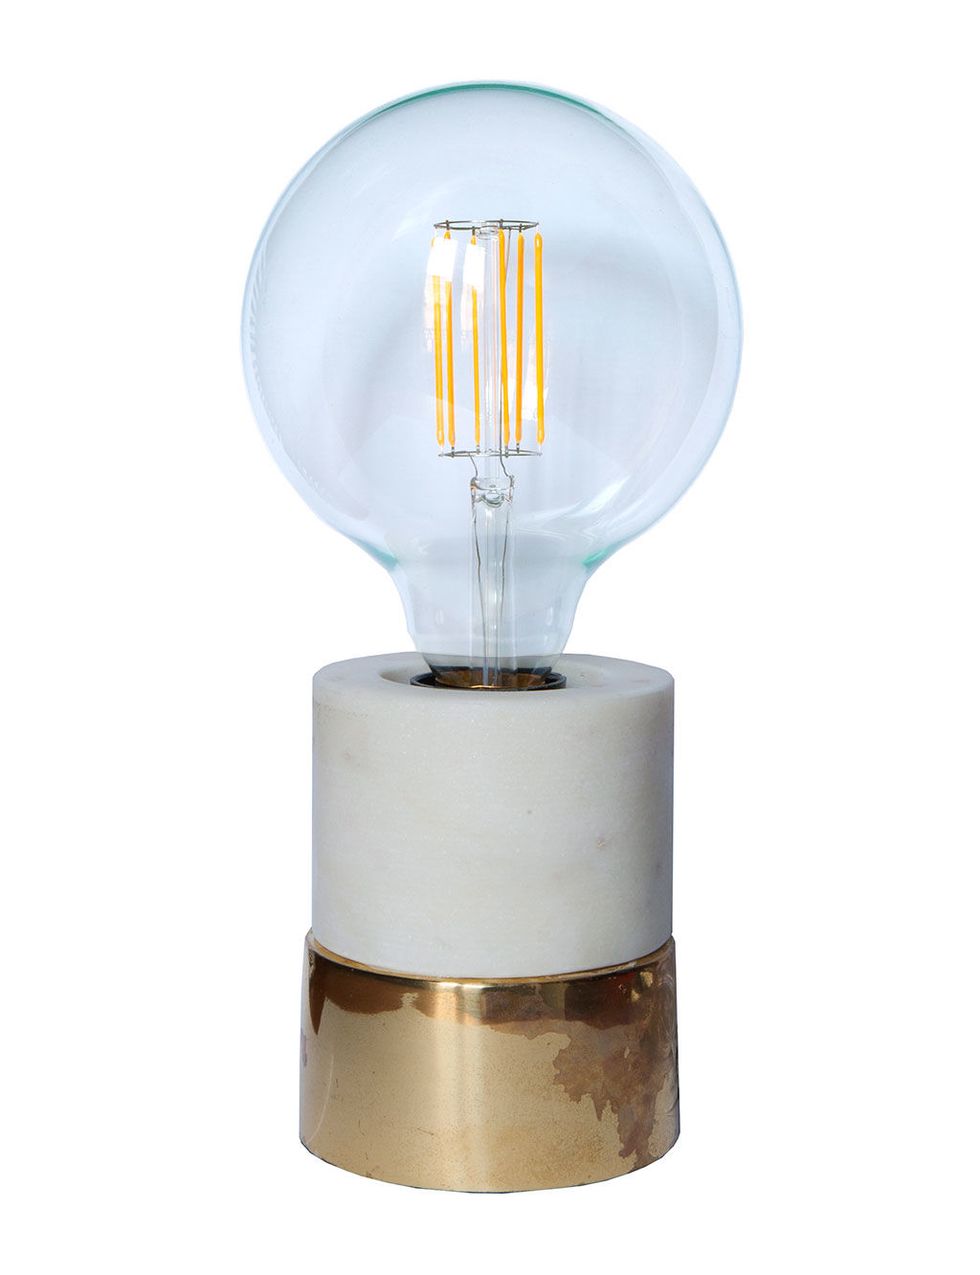 Product, Light bulb, Incandescent light bulb, Khaki, Beige, Electricity, Electrical supply, Natural material, Cable, Circuit component, 